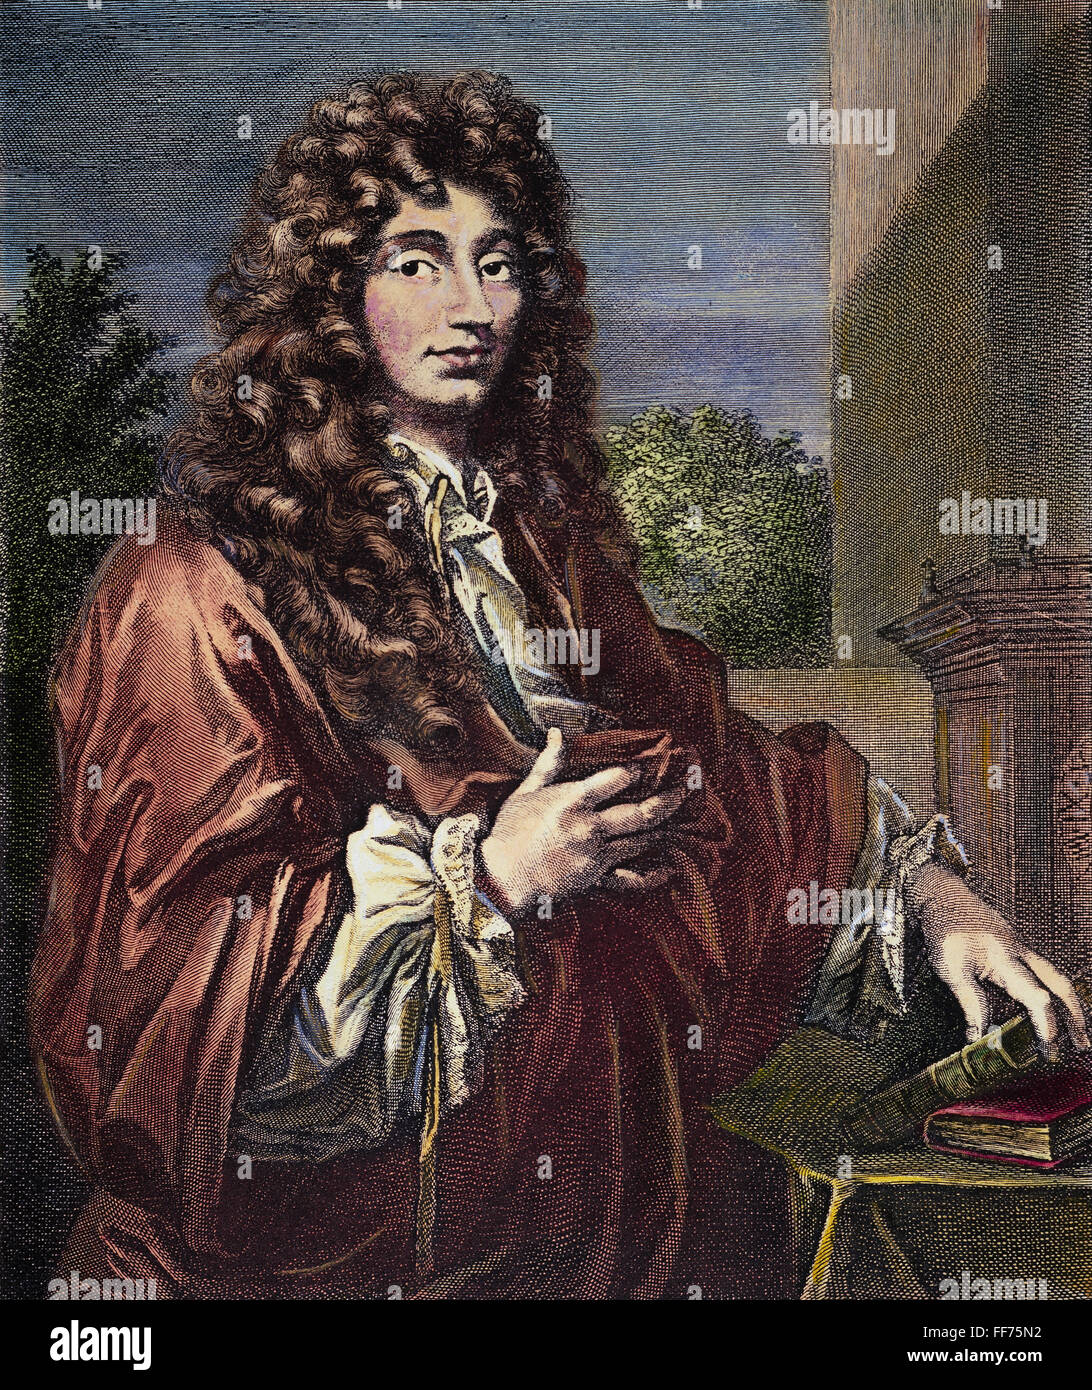 CHRISTIAN HUYGENS /n(1629-1695). Dutch mathematician, physicist, and astronomer. Colored Dutch engraving, 17th century. Stock Photo